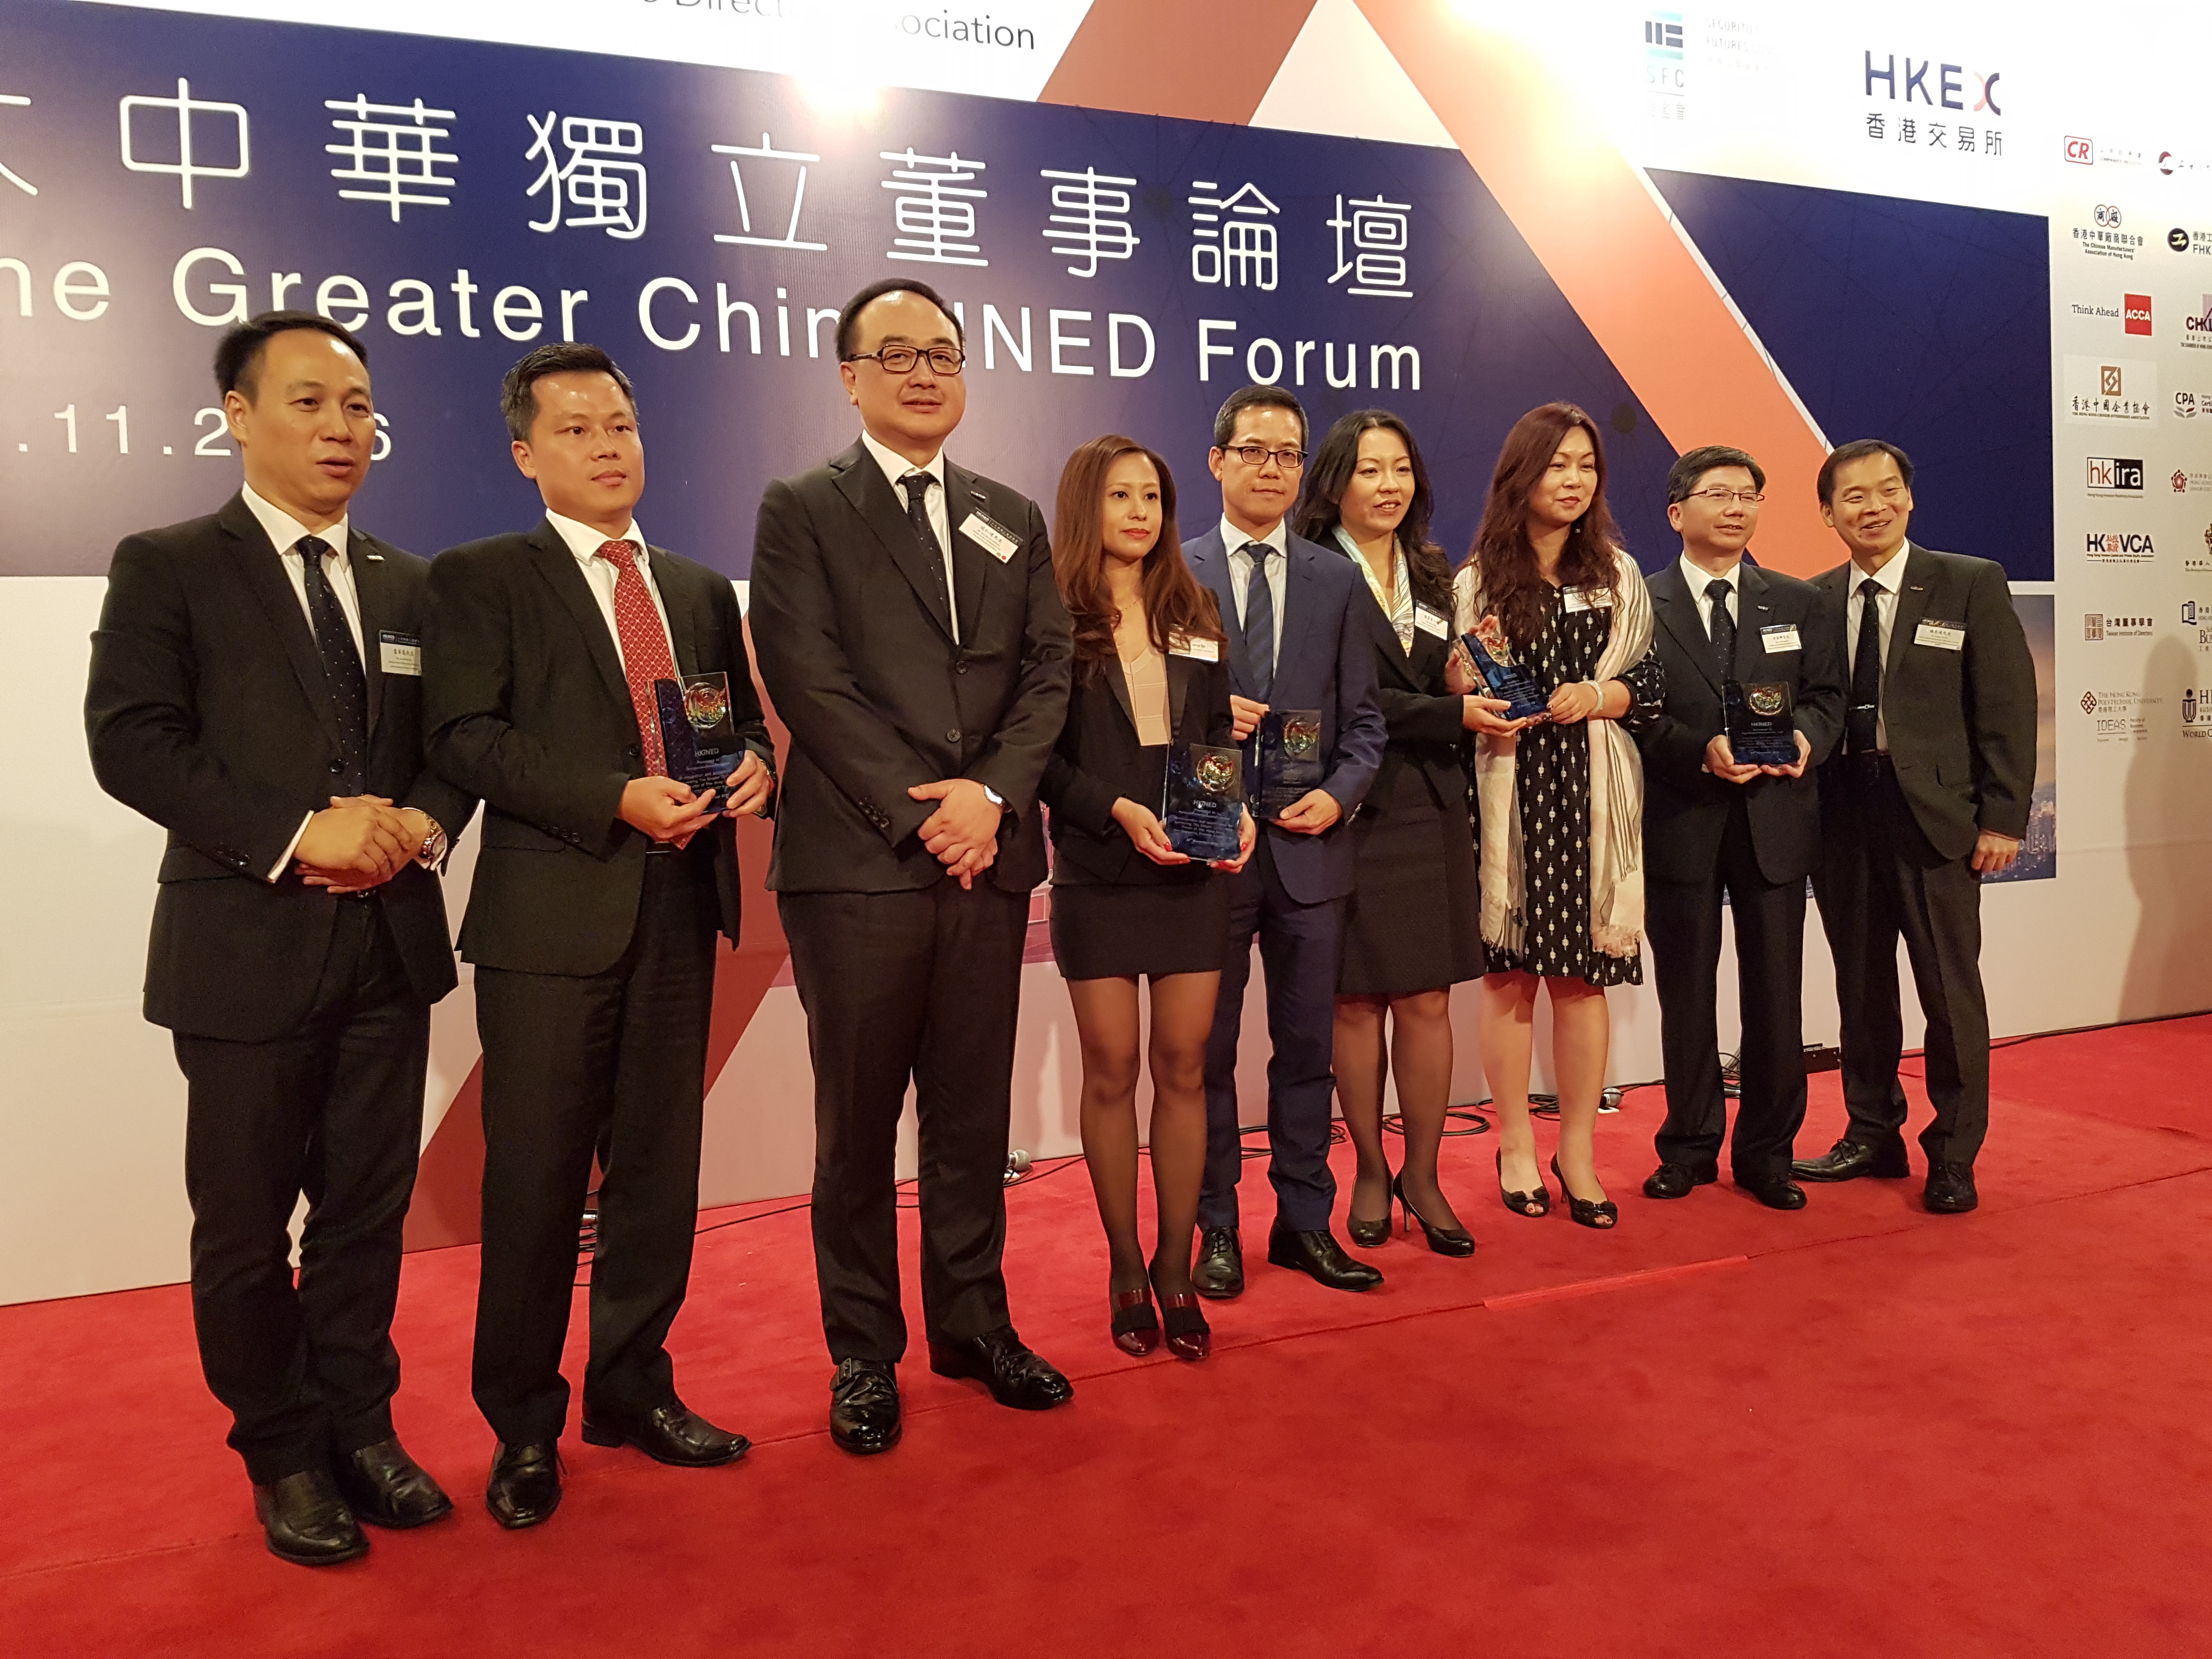 ONC sponsored The Greater China INED Forum